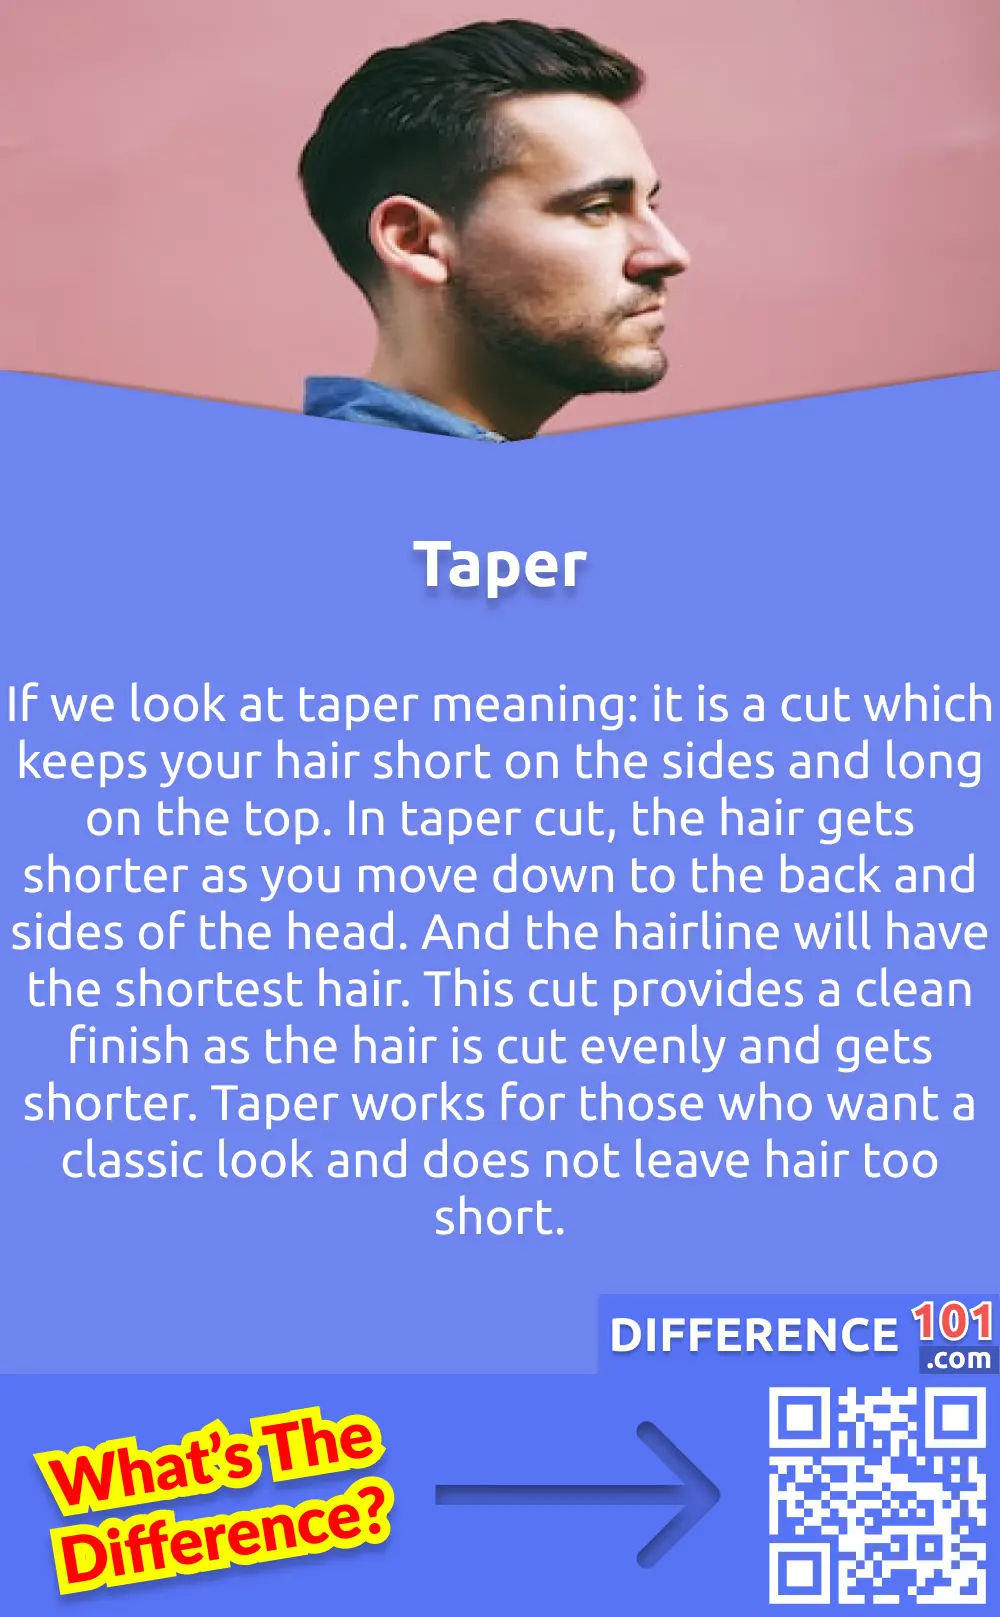 sej tyve Trivial Taper vs. Fade: 5 Key Differences, Pros & Cons, Examples | Difference 101